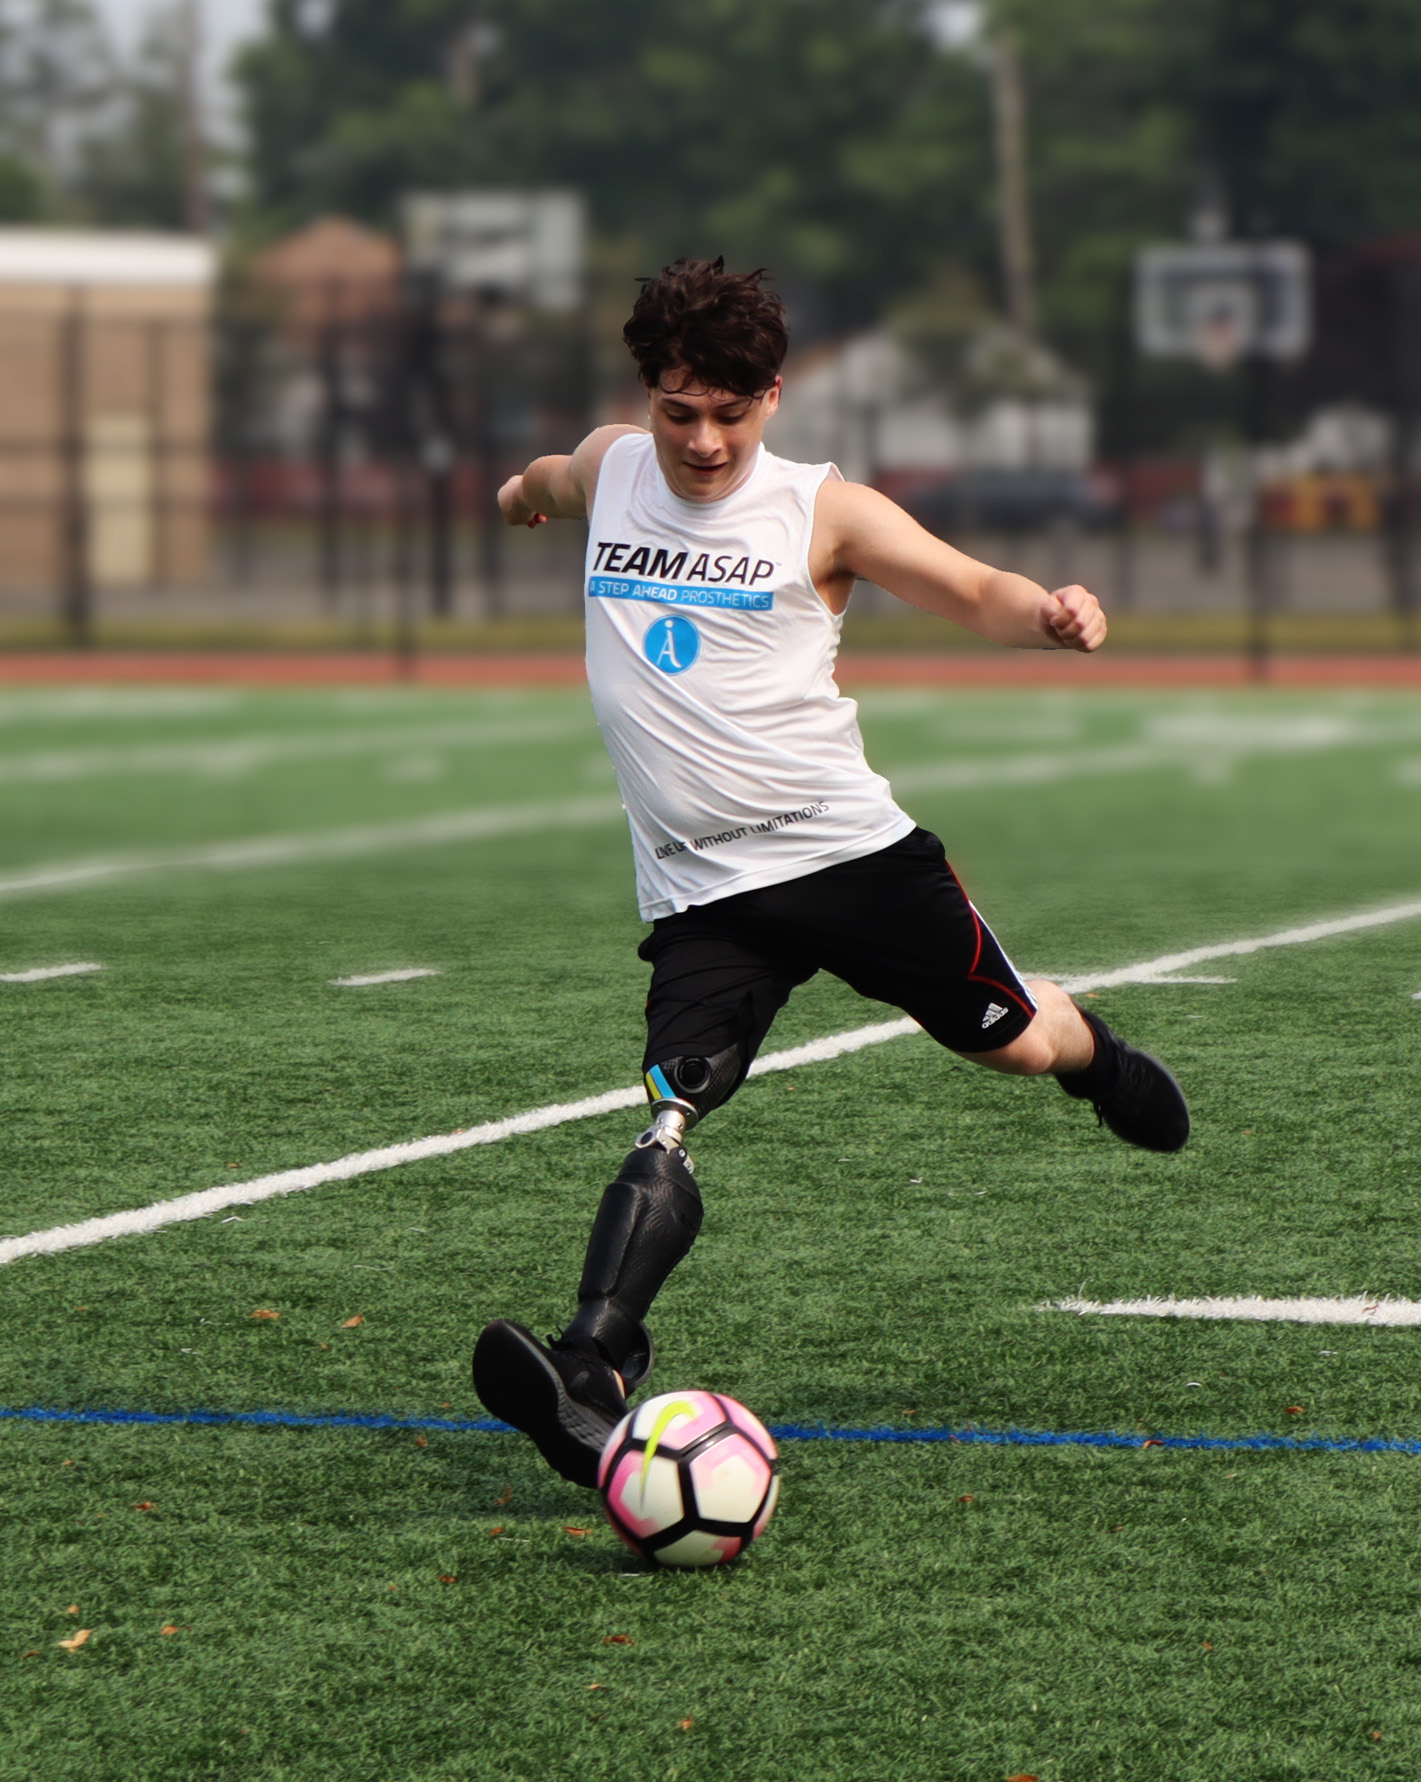 Above knee amputee playing soccer with a high activity leg